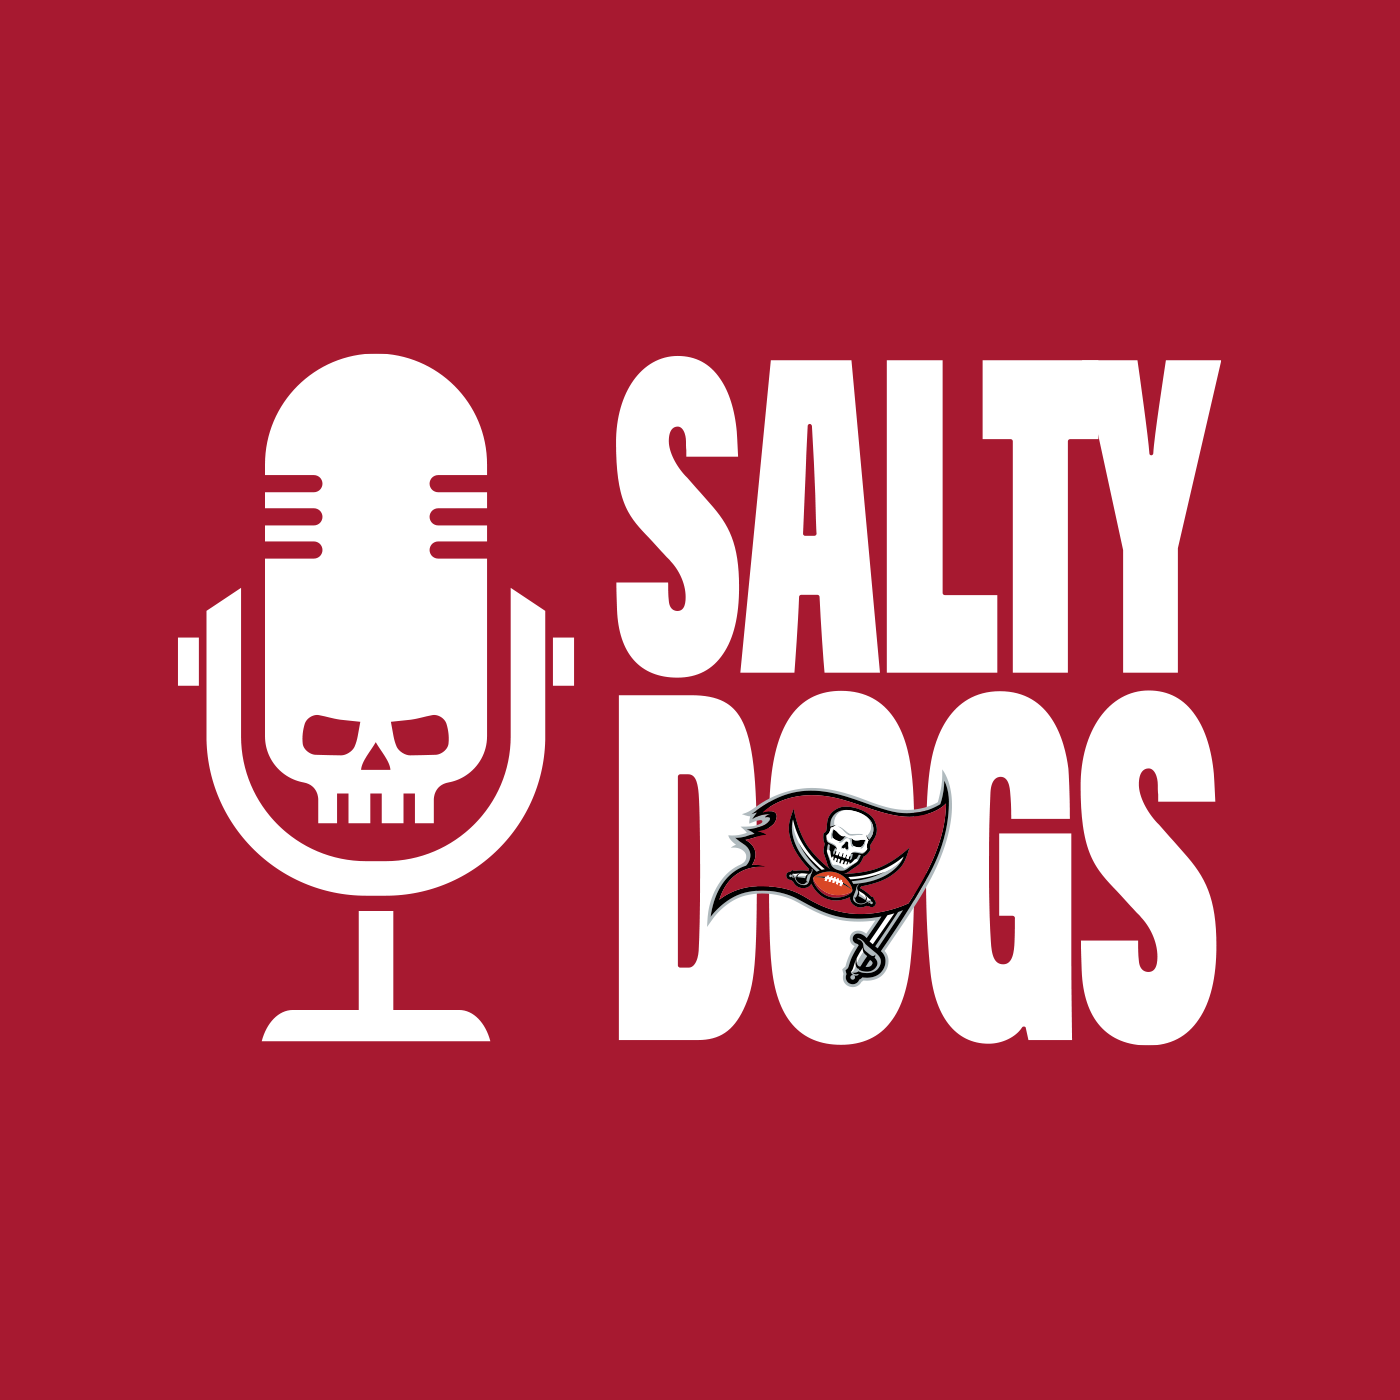 2022 NFL Draft Roundup Featuring Brianna Dix | Salty Dogs